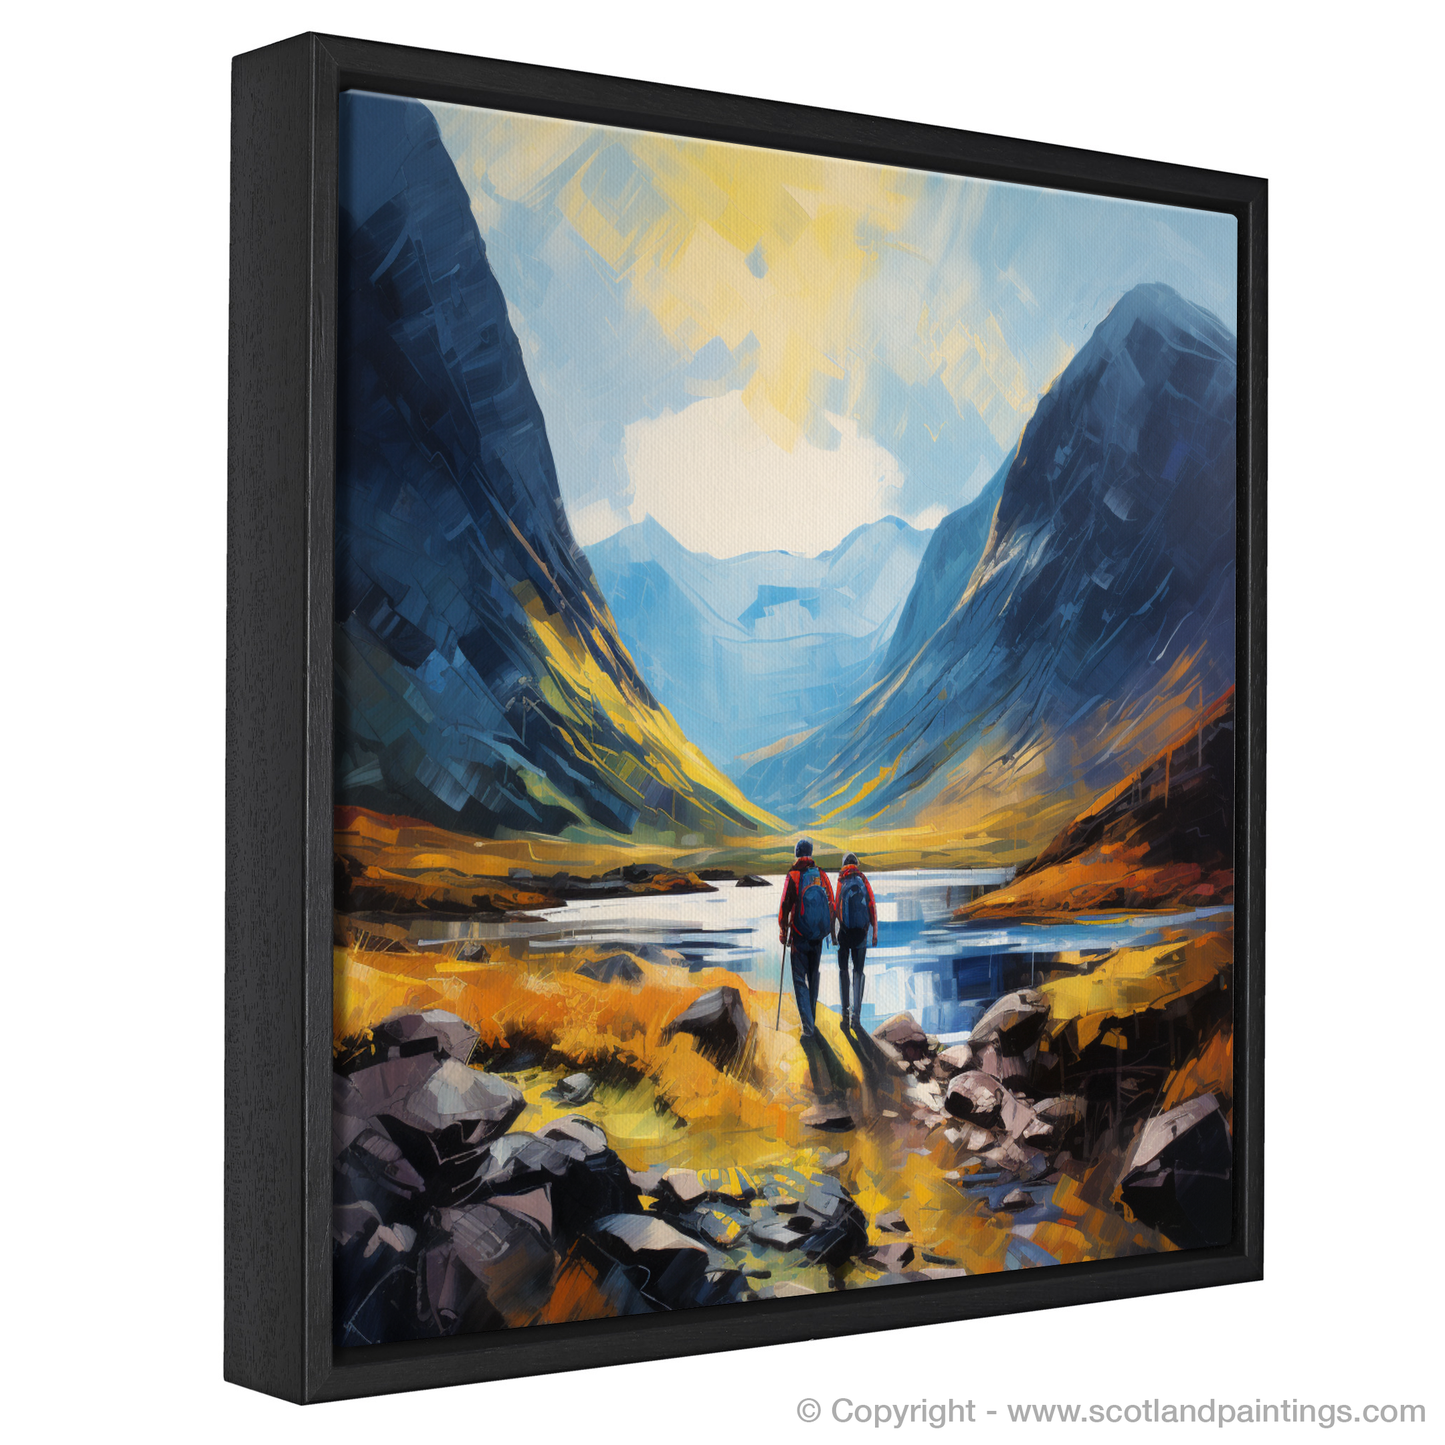 Painting and Art Print of Hikers in Glencoe entitled "Hikers in Glencoe: A minimalist ode to Scotland's natural majesty".